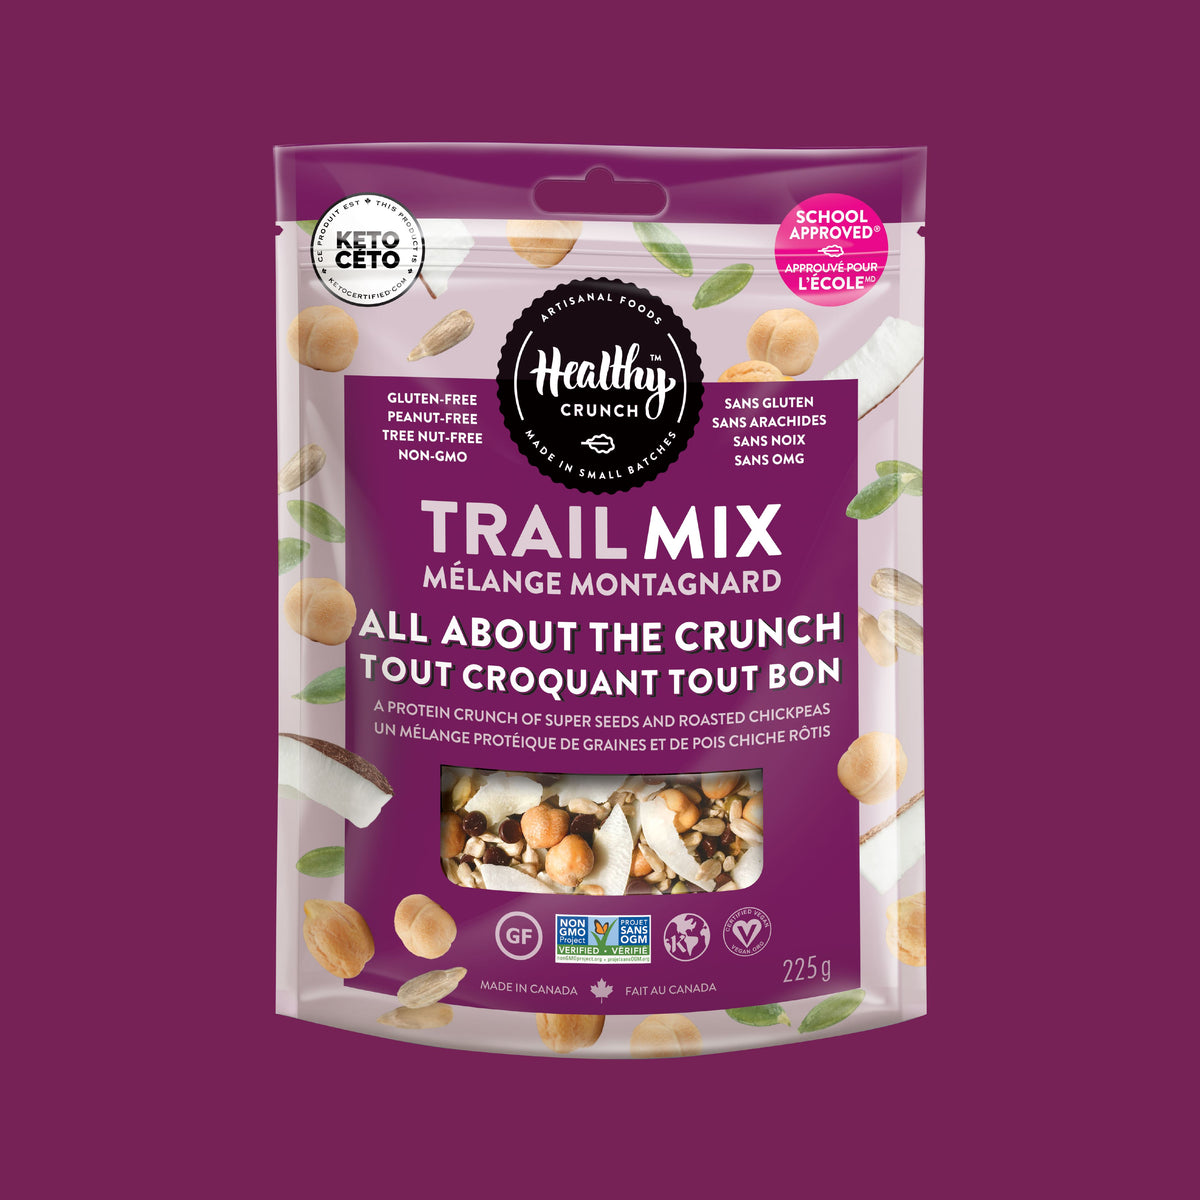 All About The Crunch Trail Mix